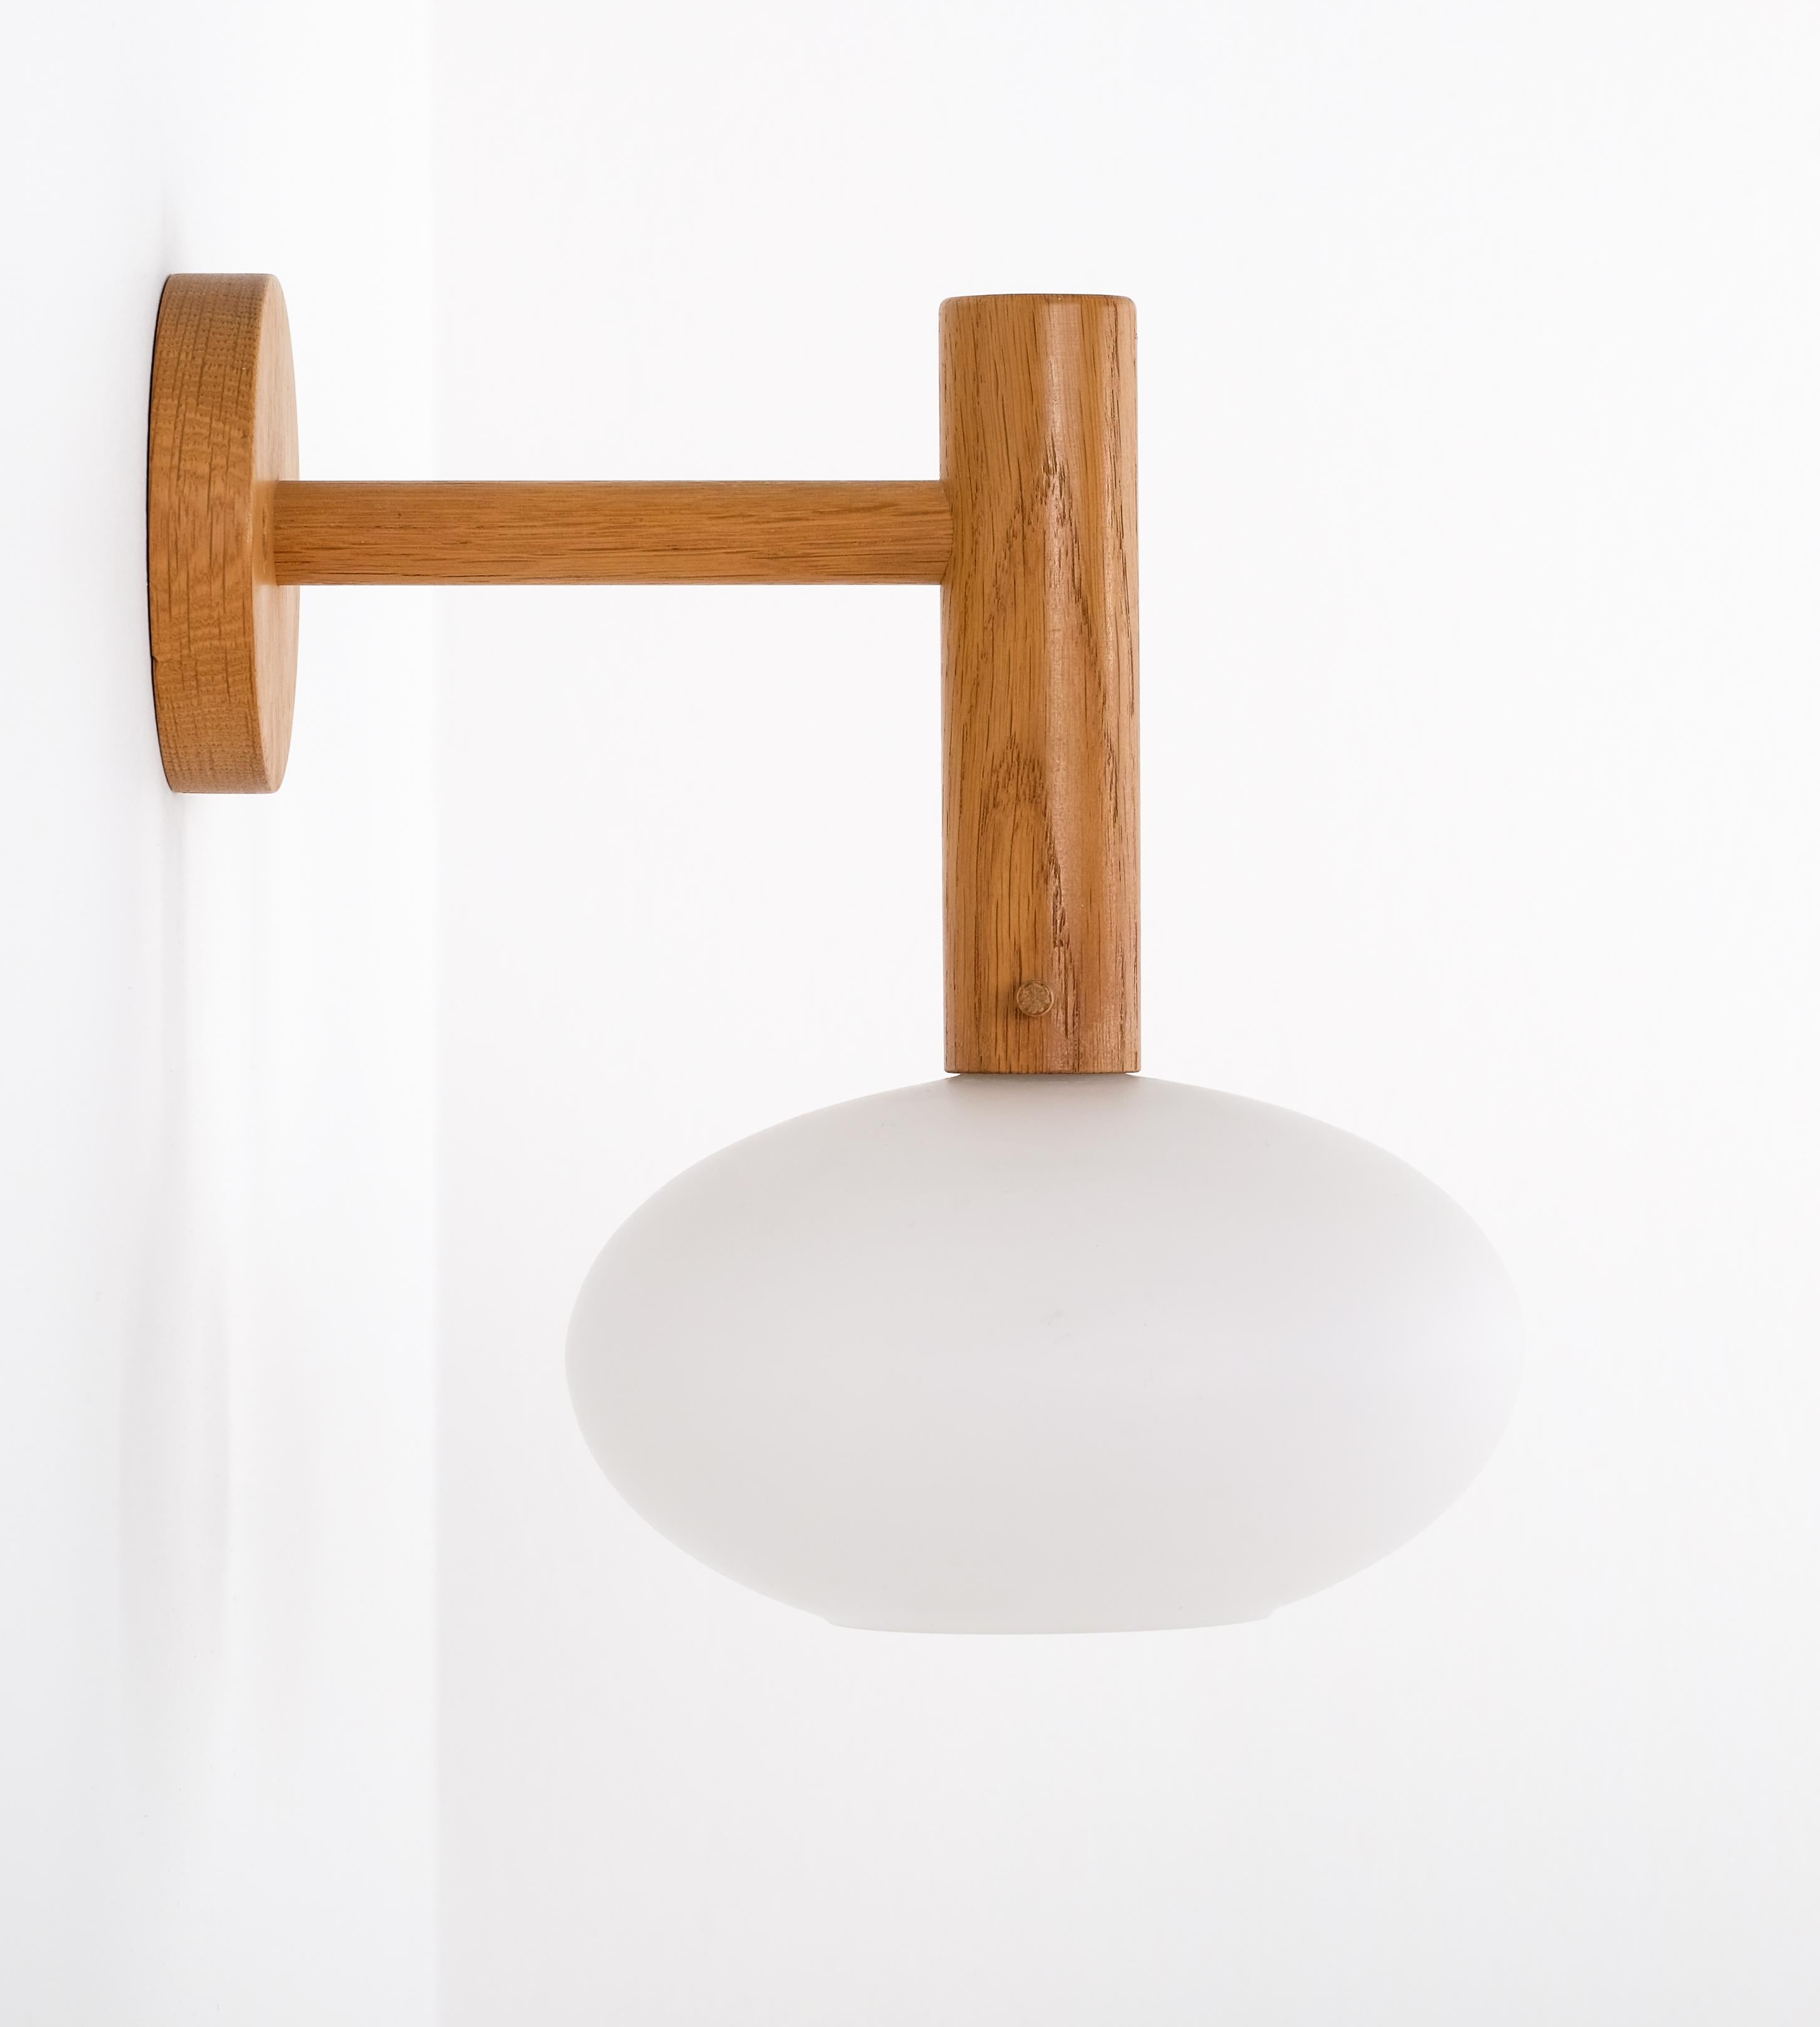 Scandinavian Modern Pair of Wall Lamps by Uno & Östen Kristiansson for Luxus, 1960s For Sale